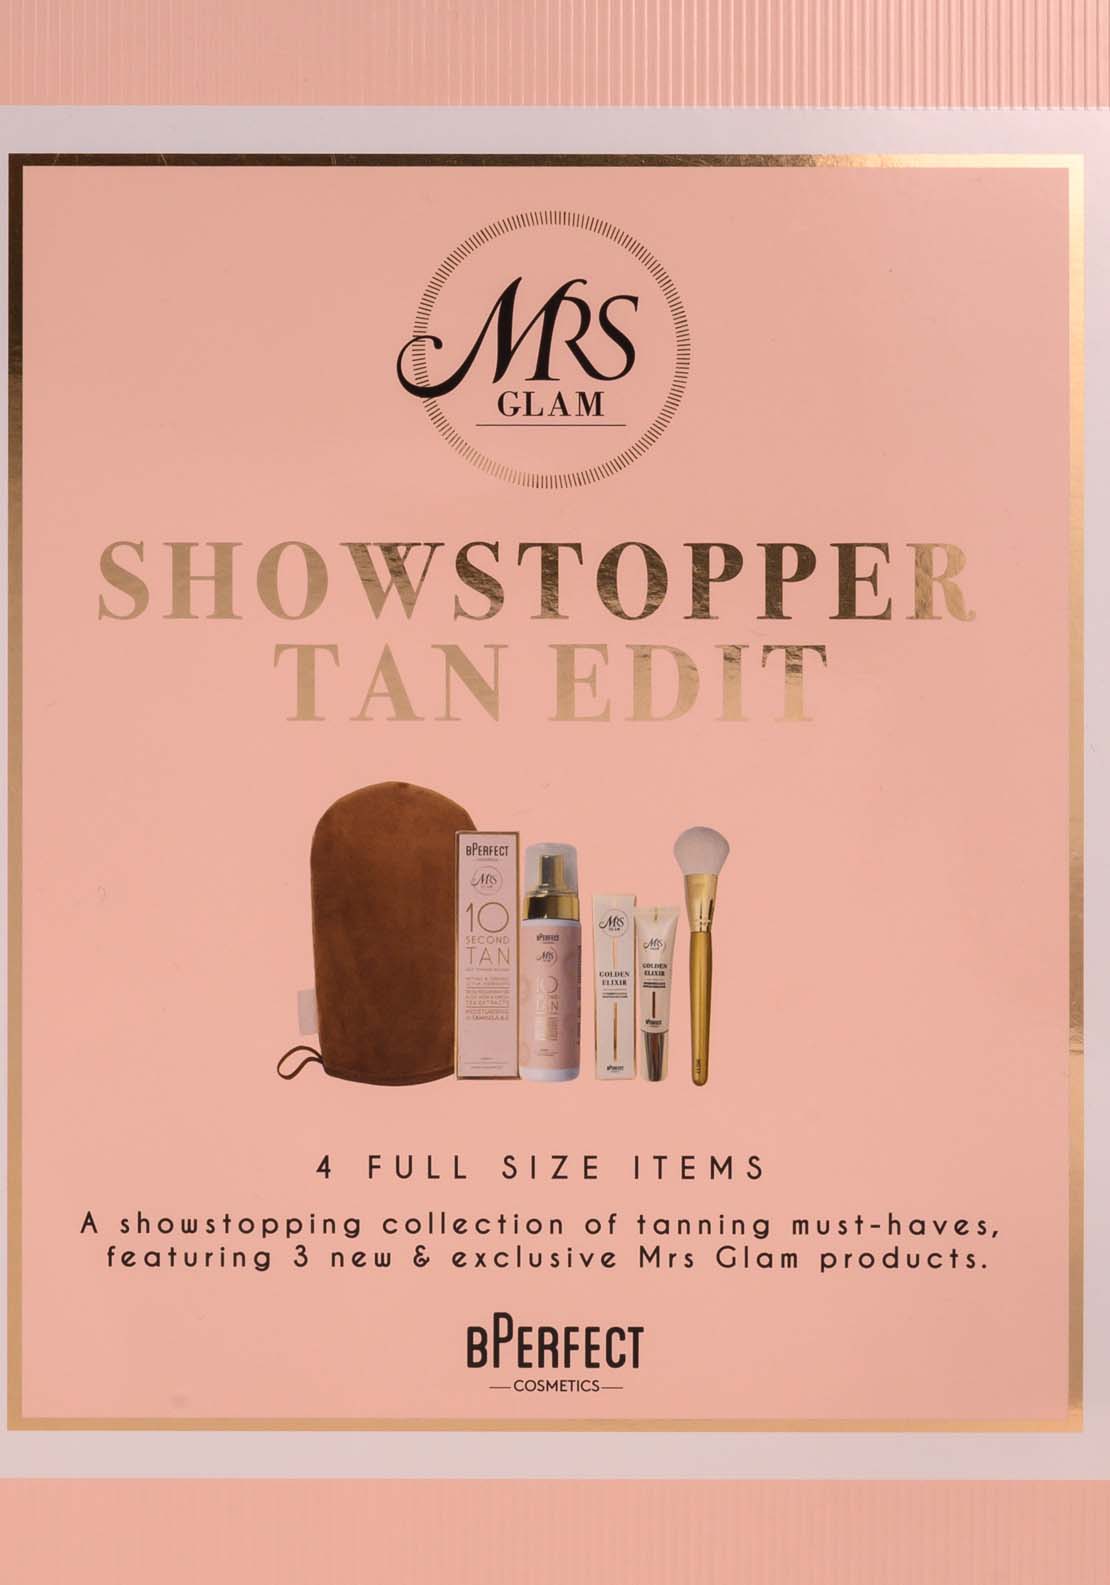 Mrs Glam - The Showstopper Tan Edit